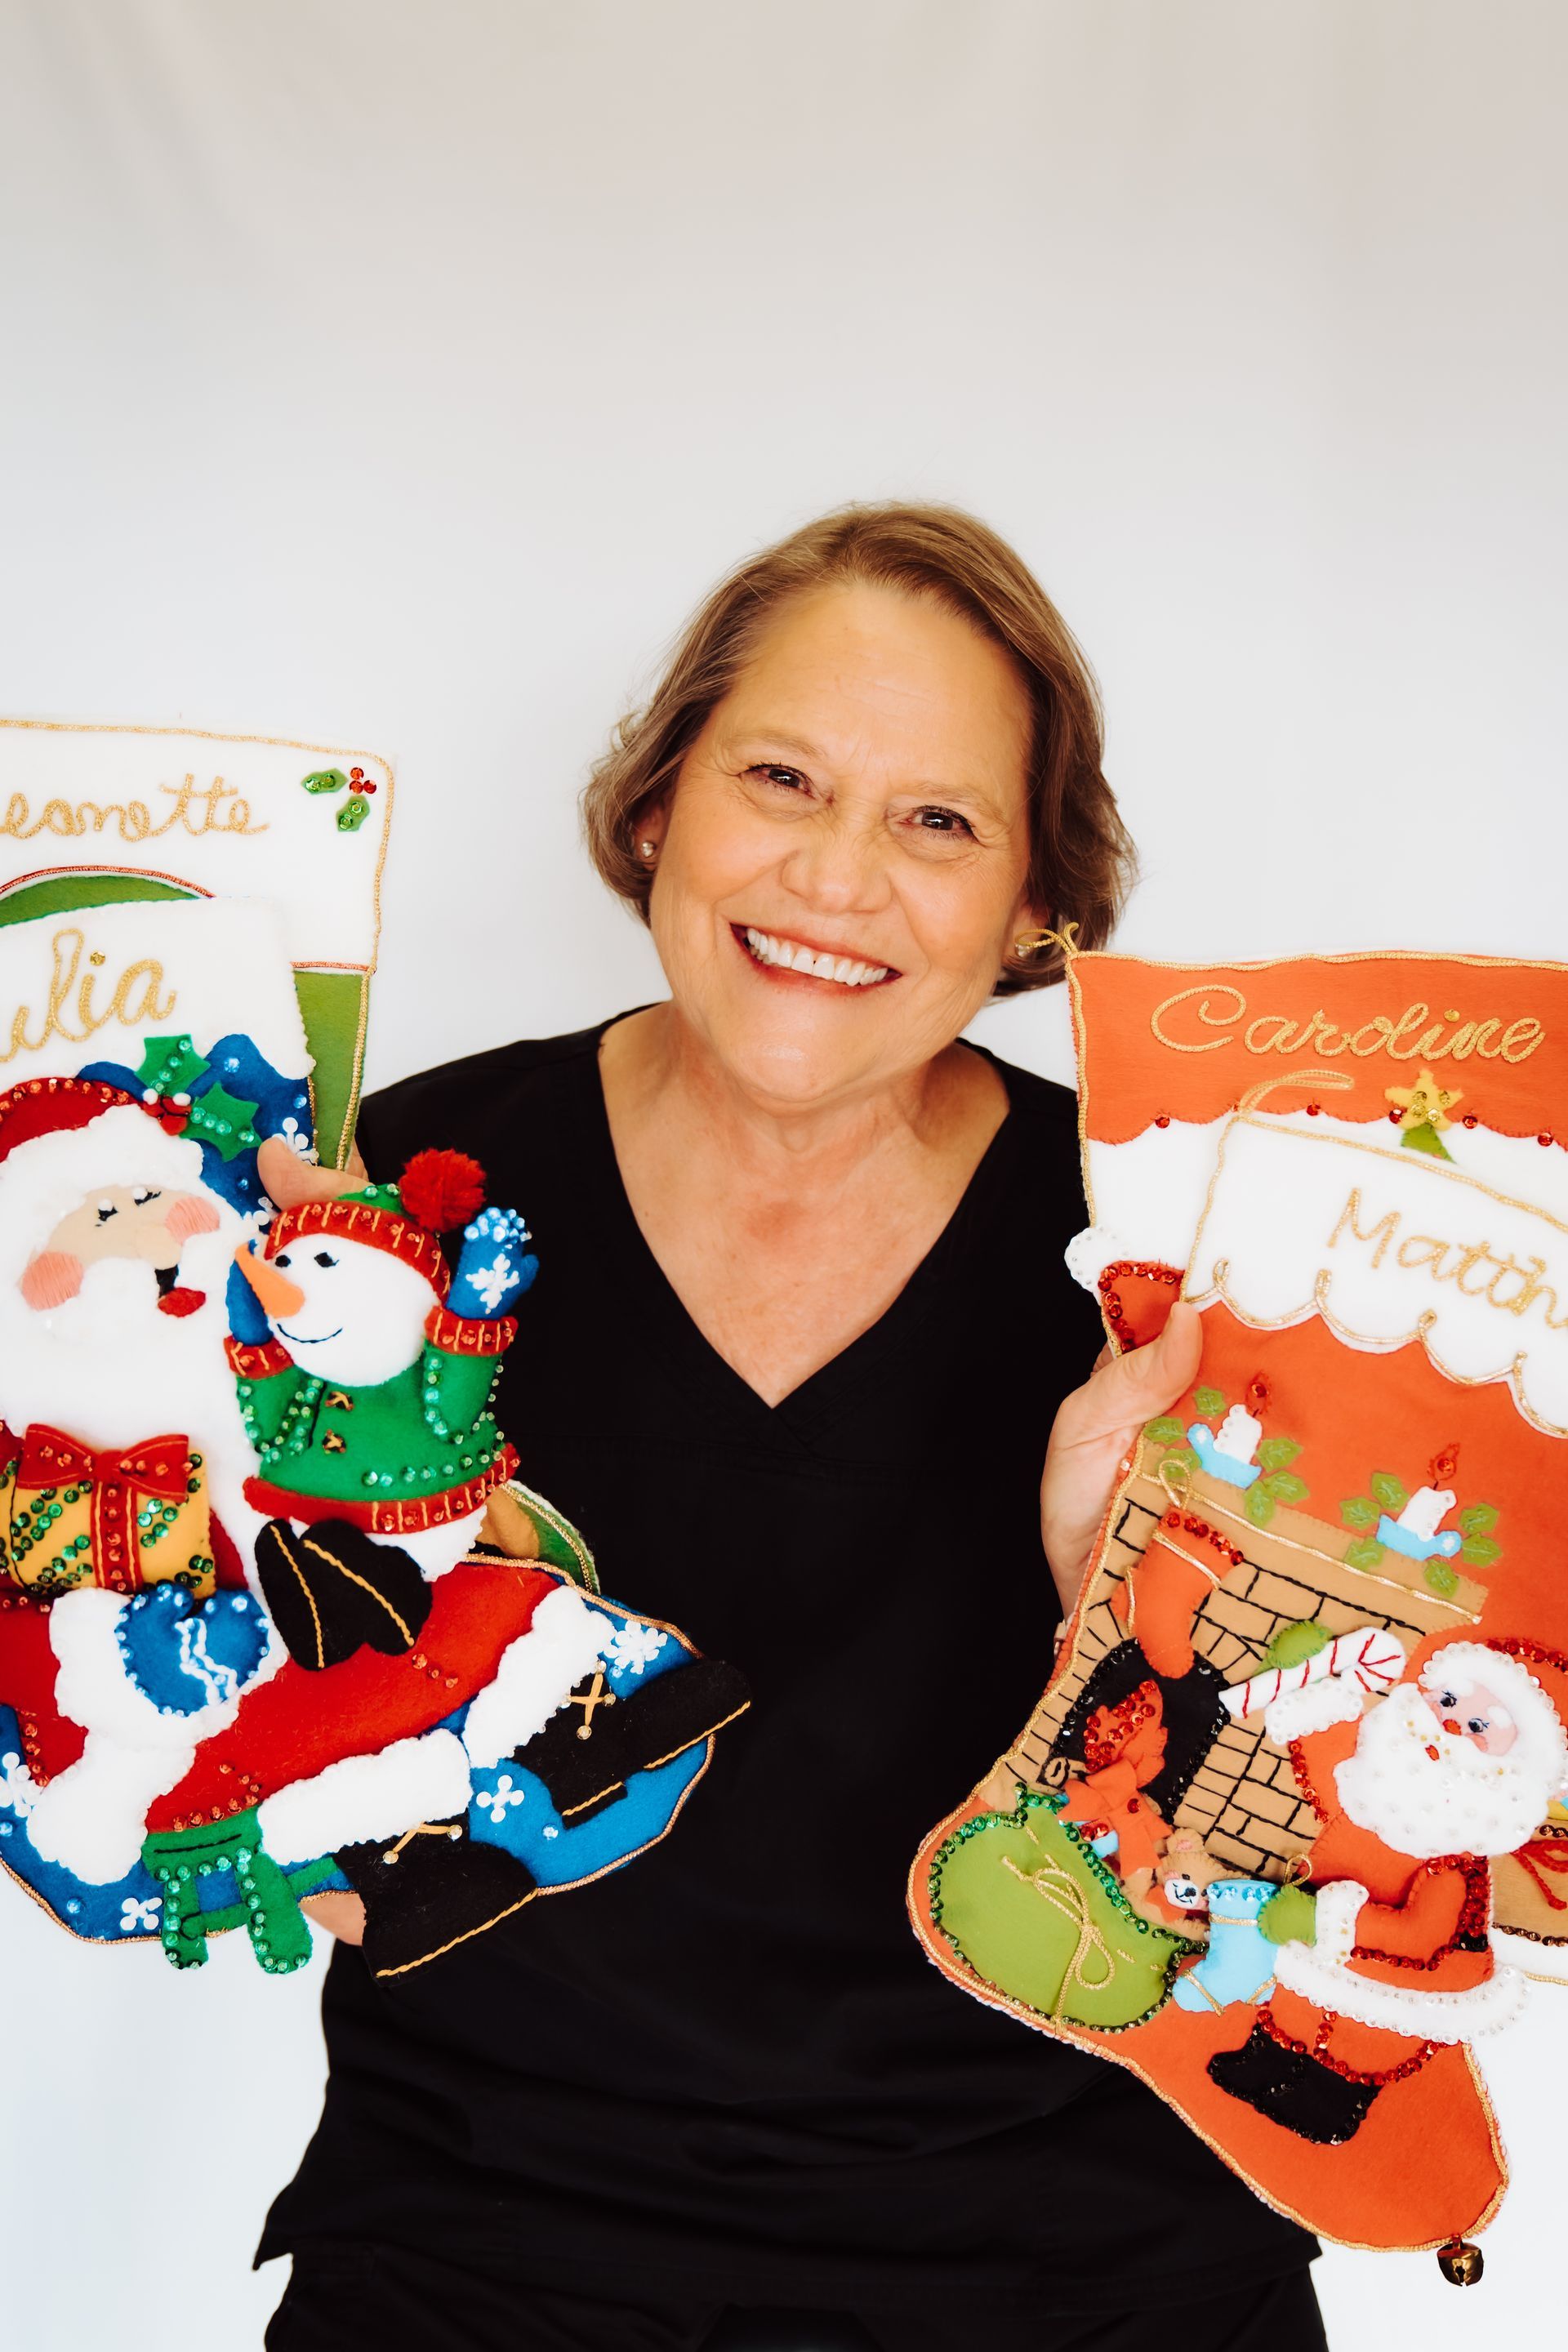 a woman in a black shirt is holding two christmas stockings